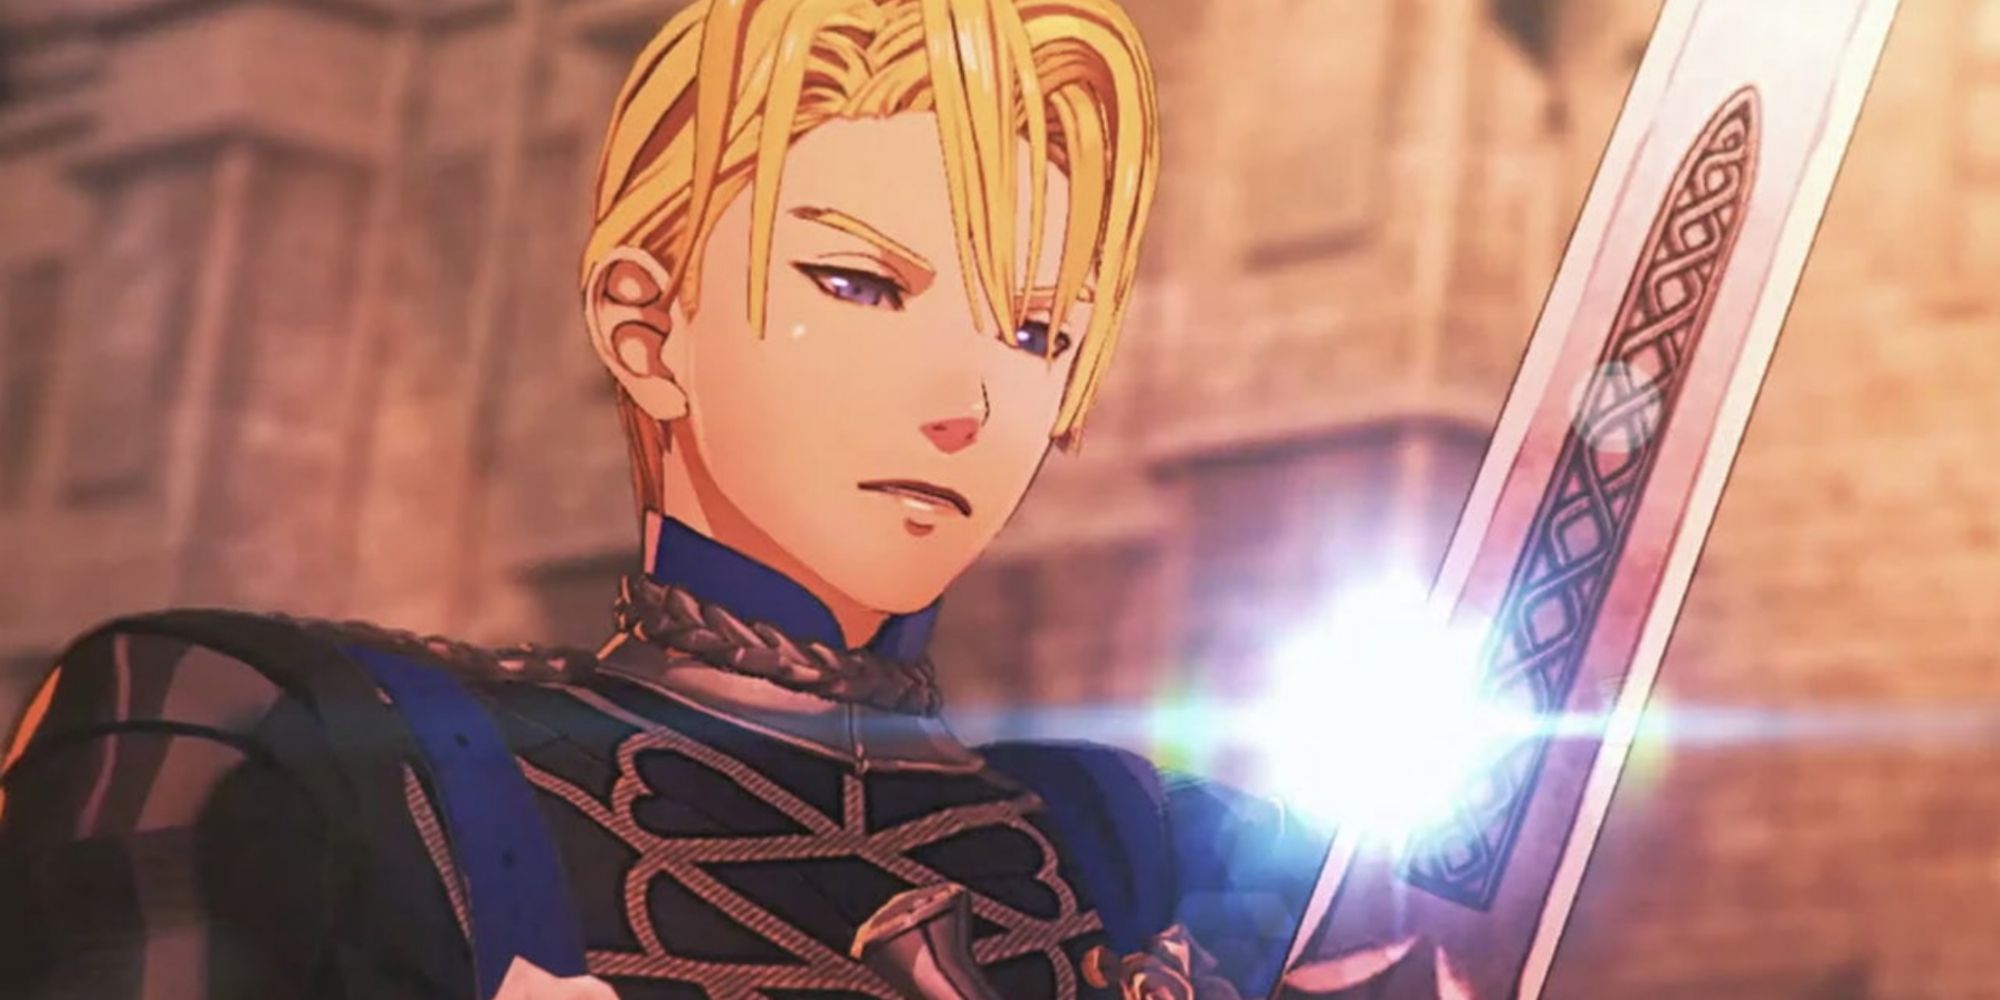 Dimitri holds sword glinting in the sunlight